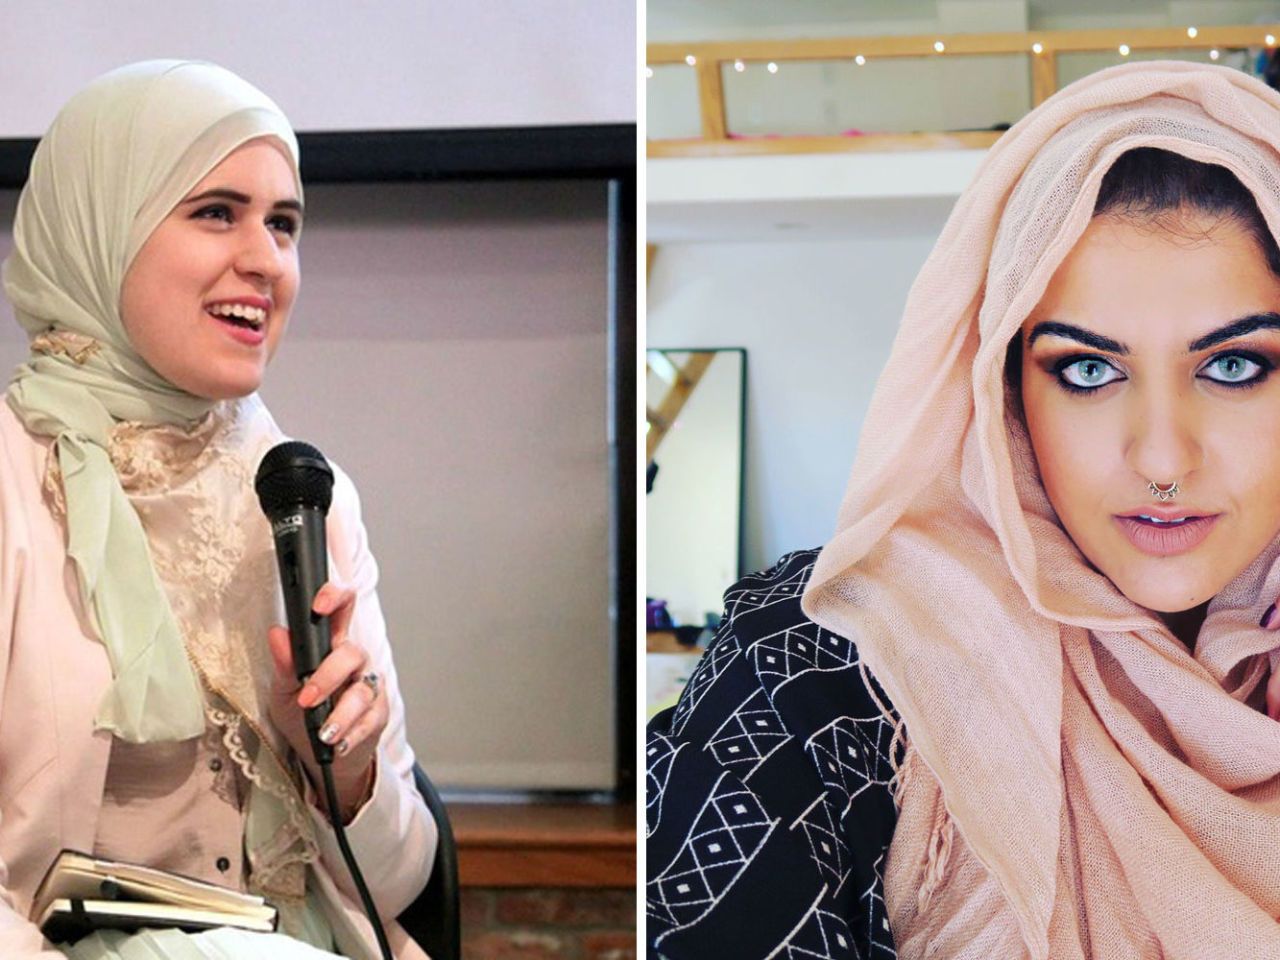 These Twentysomething Muslim Women Are Clapping Back Against Stereotypes